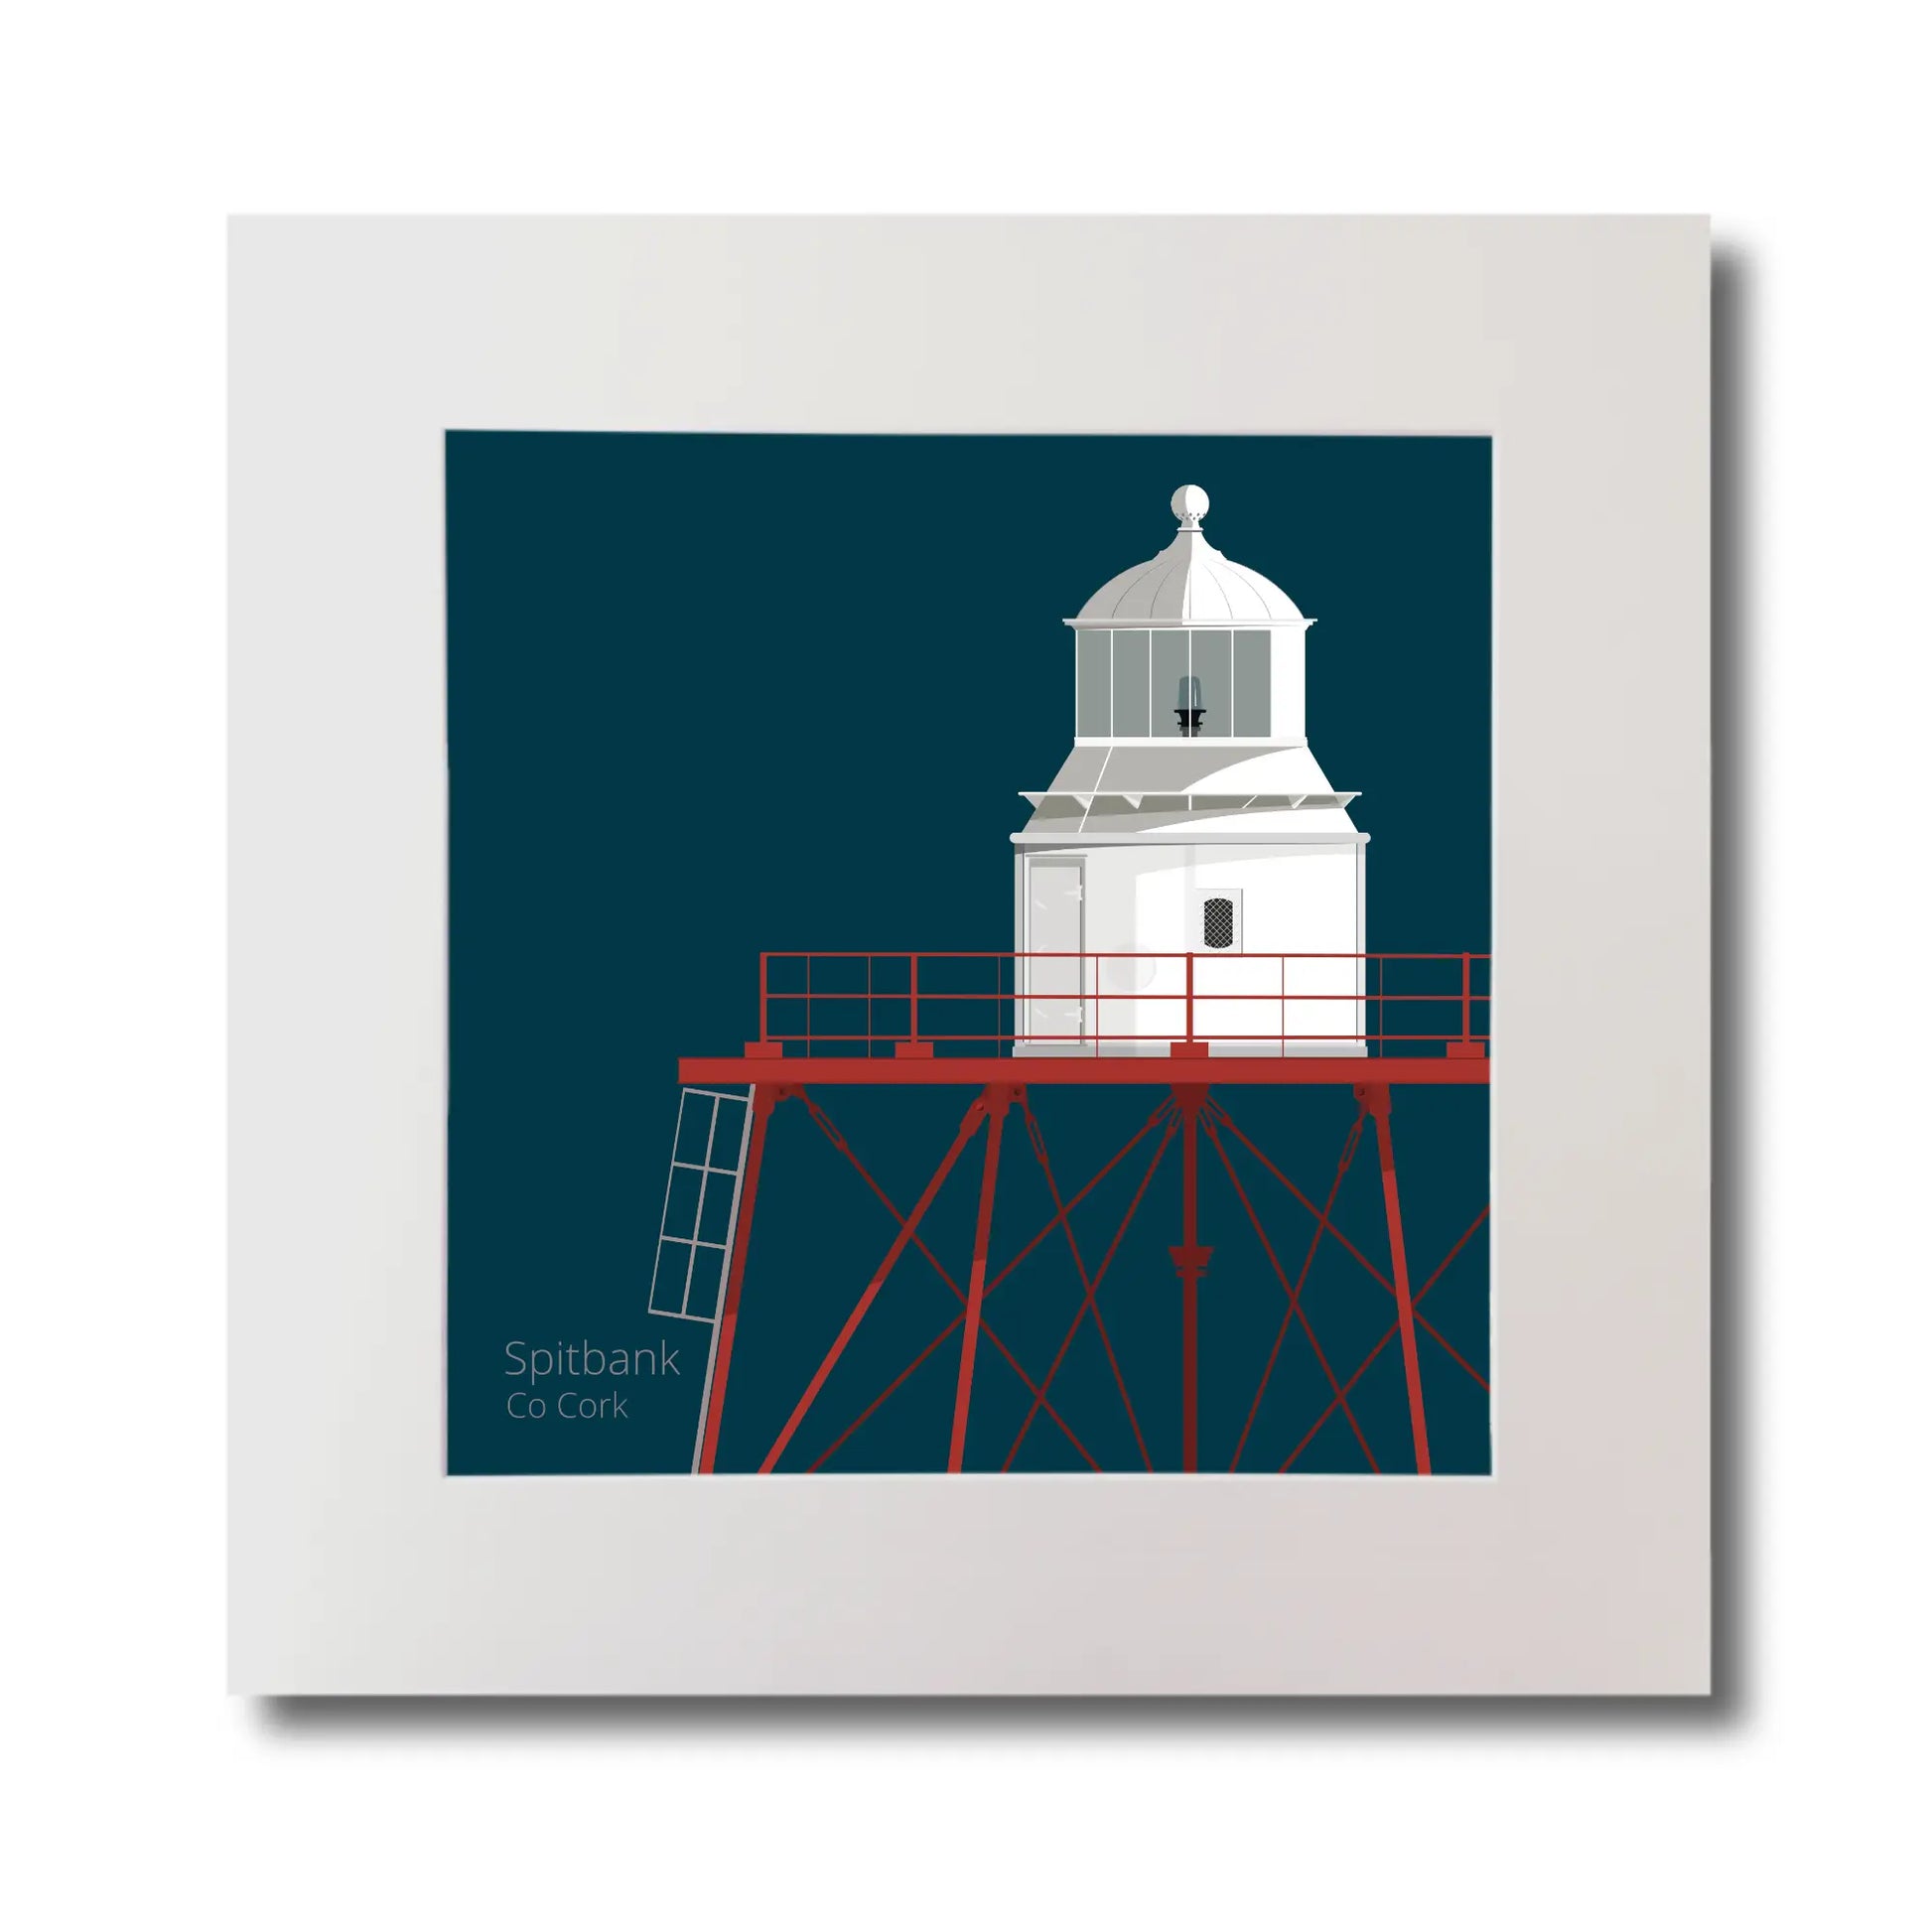 Illustration of Spitbank lighthouse on a midnight blue background, mounted and measuring 30x30cm.